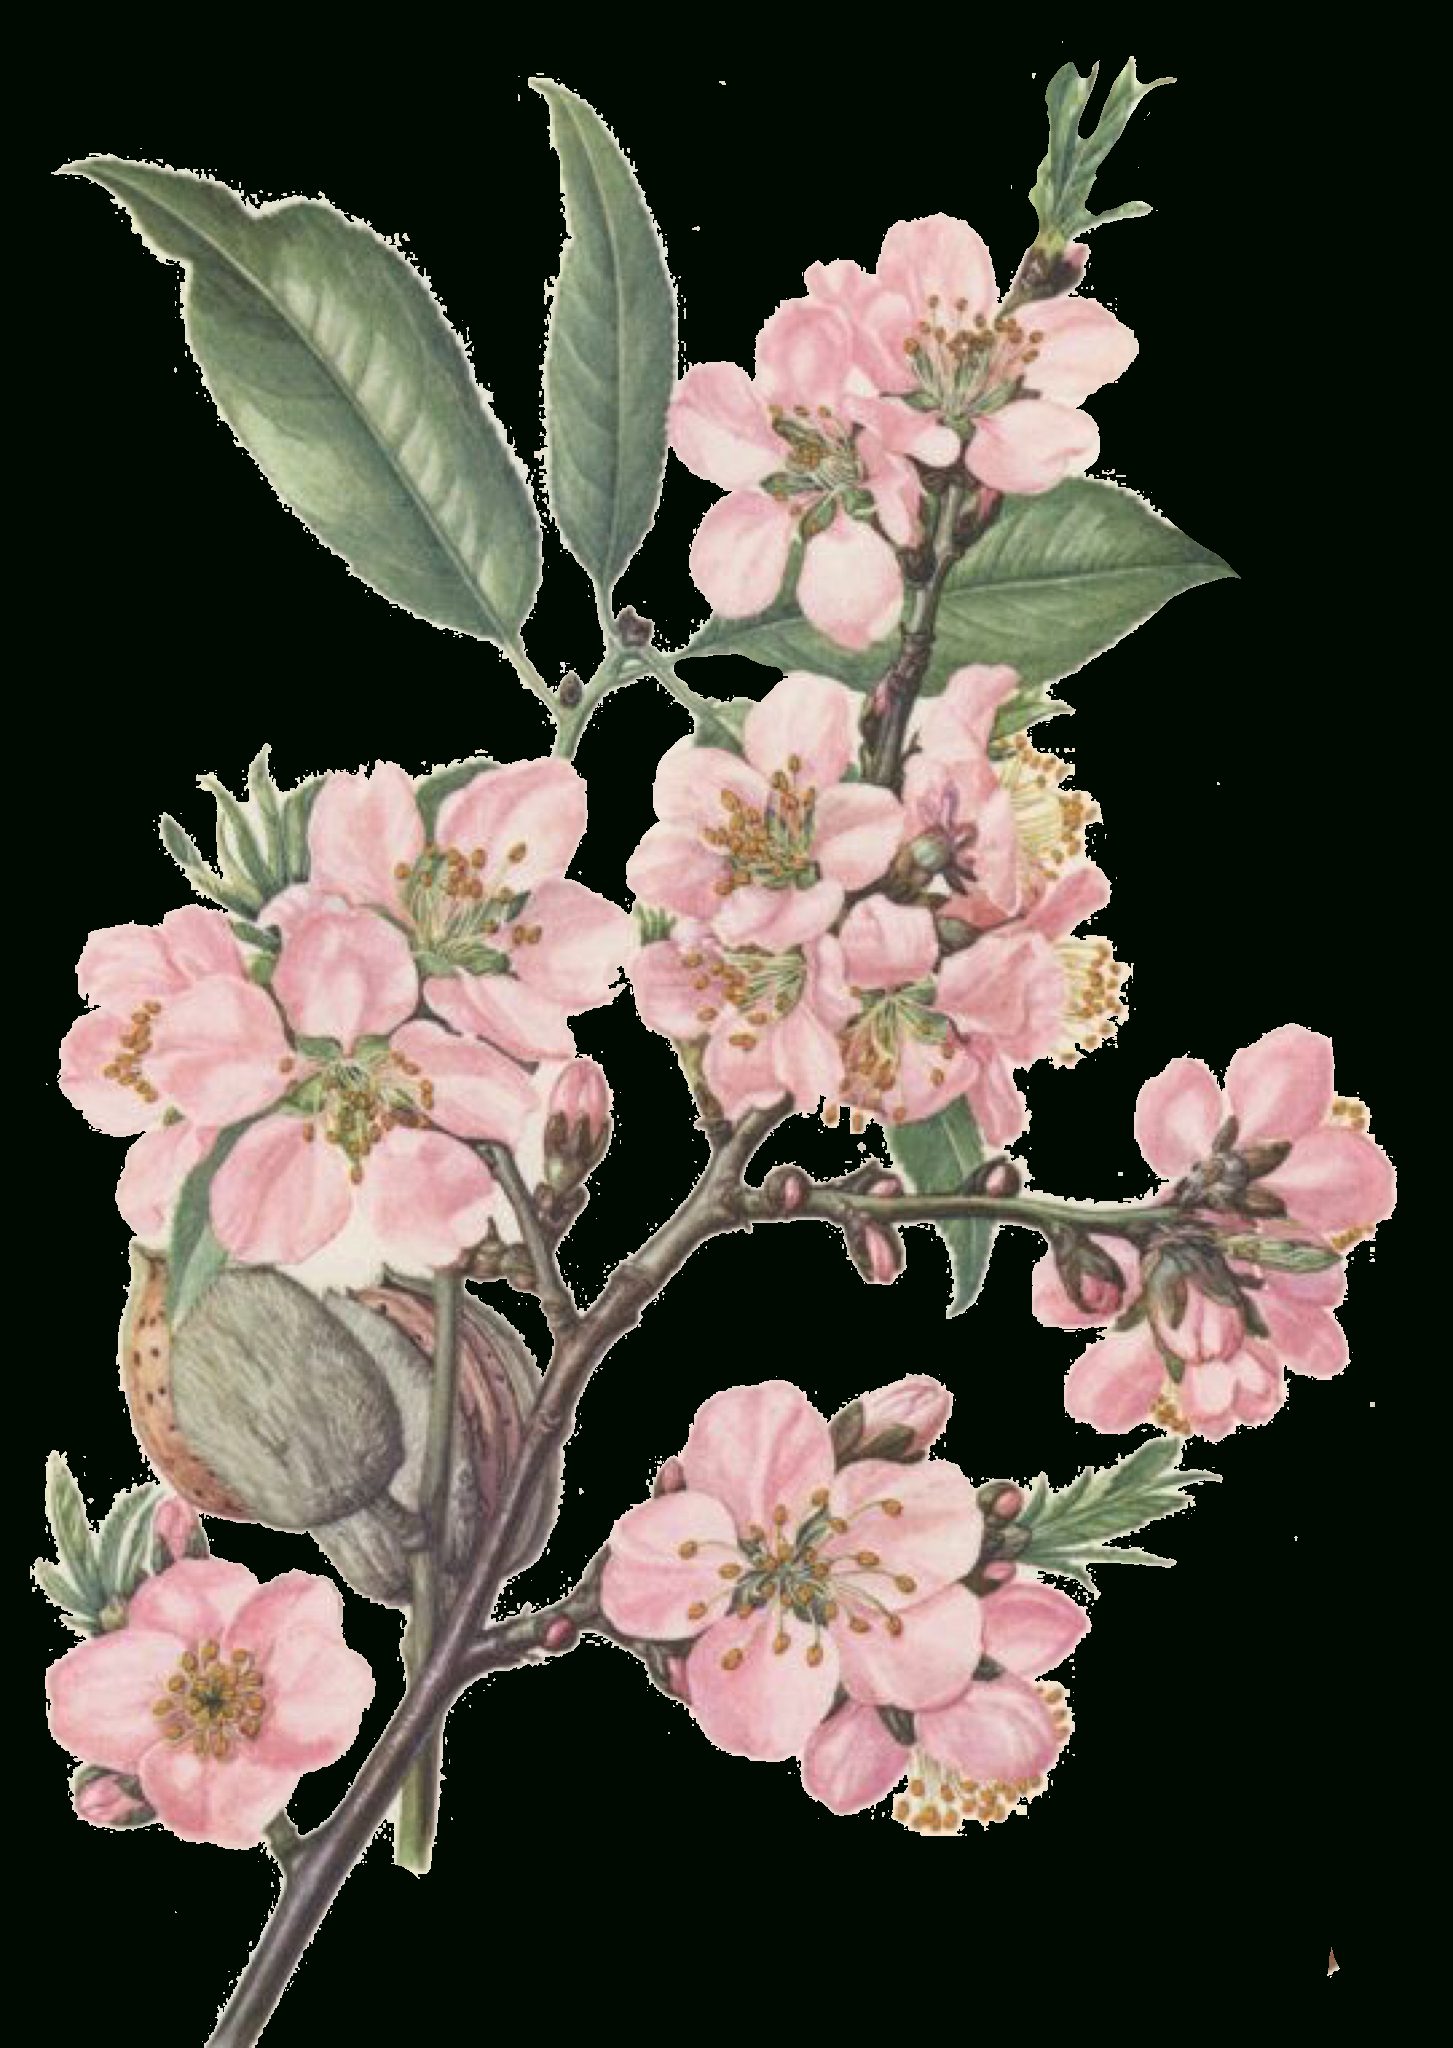 Pin By Carrie Delgadillo On Graphics | Botanical Illustration with High Quality Botanical Prints